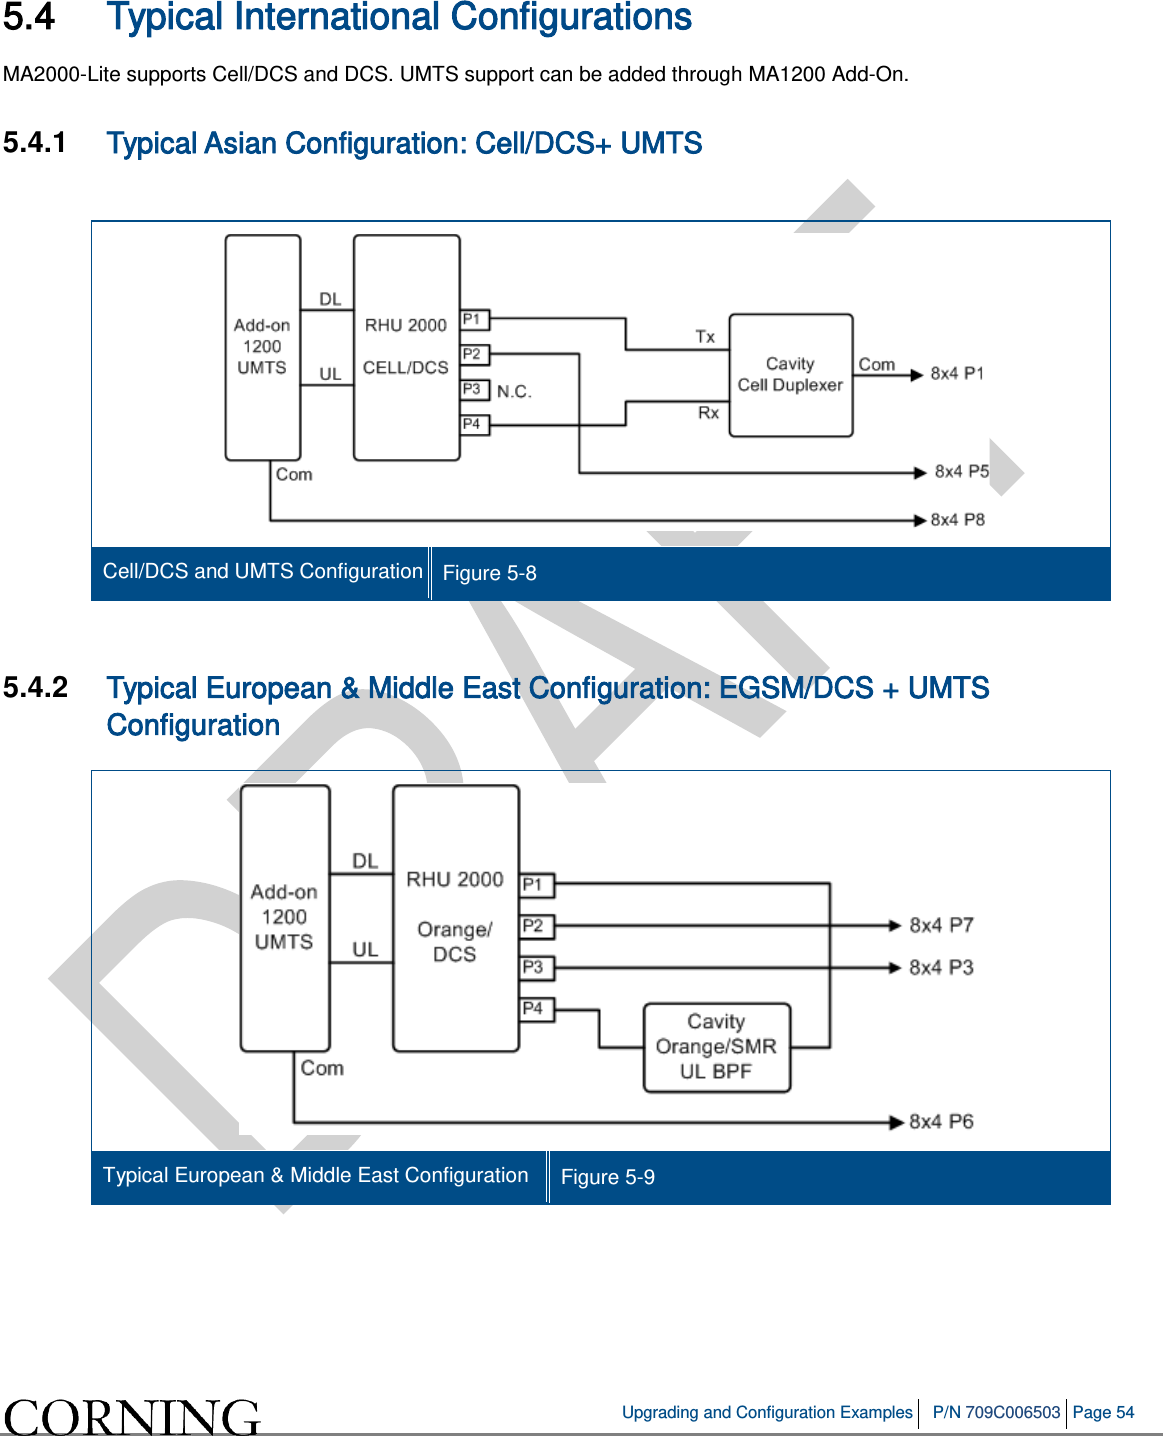   Upgrading and Configuration Examples P/N 709C006503 Page 54   5.4 Typical International Configurations MA2000-Lite supports Cell/DCS and DCS. UMTS support can be added through MA1200 Add-On.  5.4.1  Typical Asian Configuration: Cell/DCS+ UMTS   Cell/DCS and UMTS Configuration Figure  5-8    5.4.2  Typical European &amp; Middle East Configuration: EGSM/DCS + UMTS Configuration  Typical European &amp; Middle East Configuration Figure  5-9       